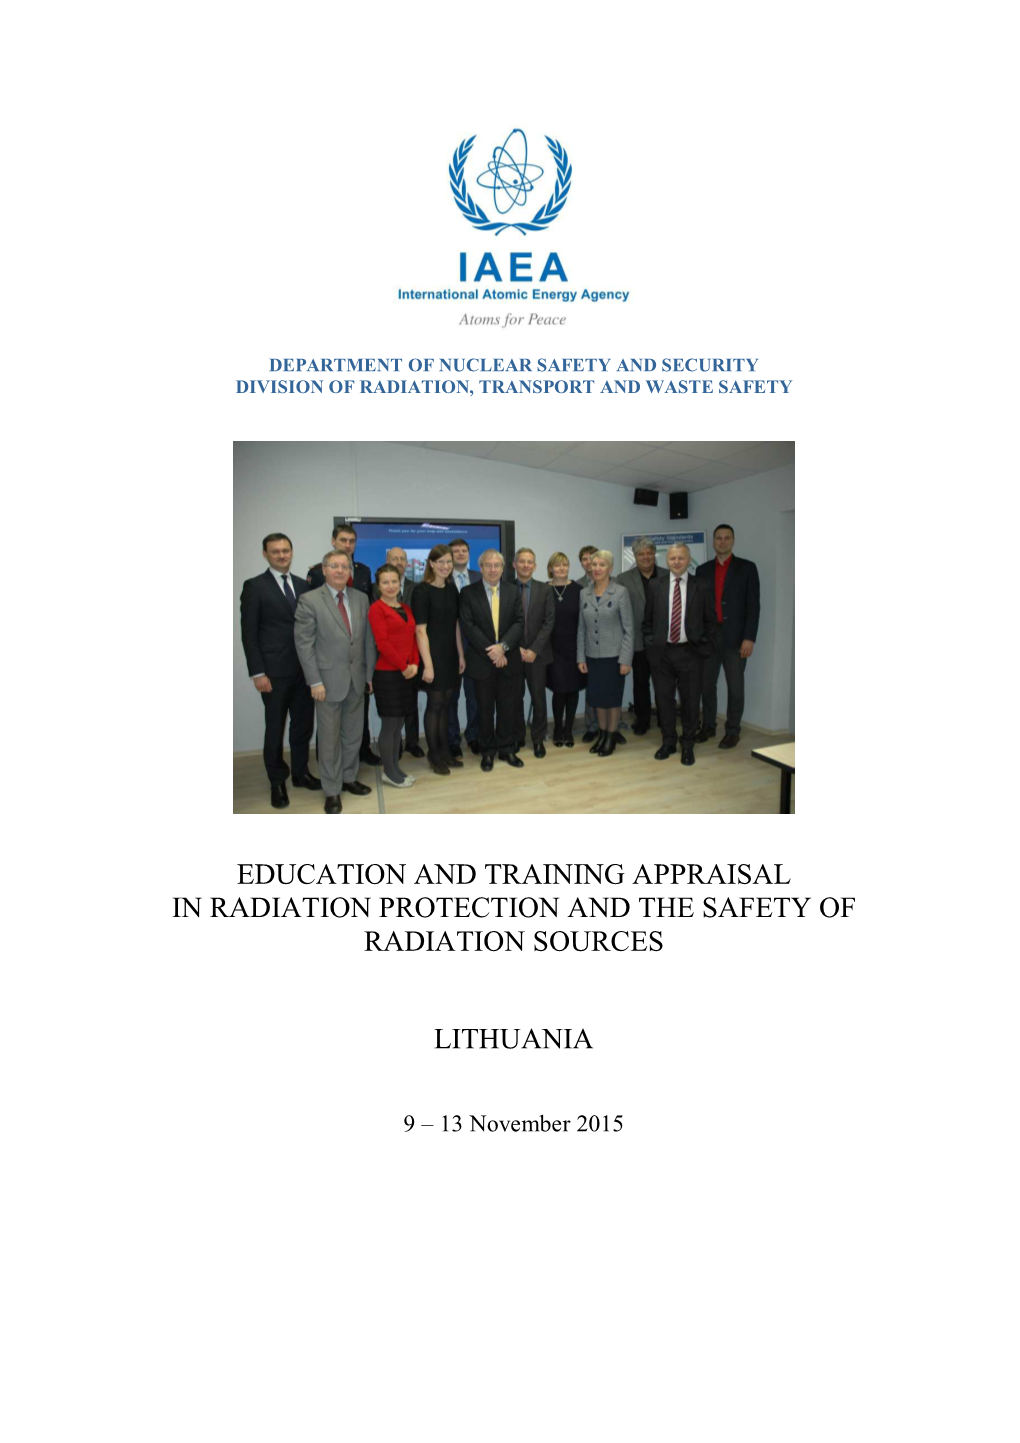 Education and Training Appraisal in Radiation Protection and the Safety of Radiation Sources Lithuania